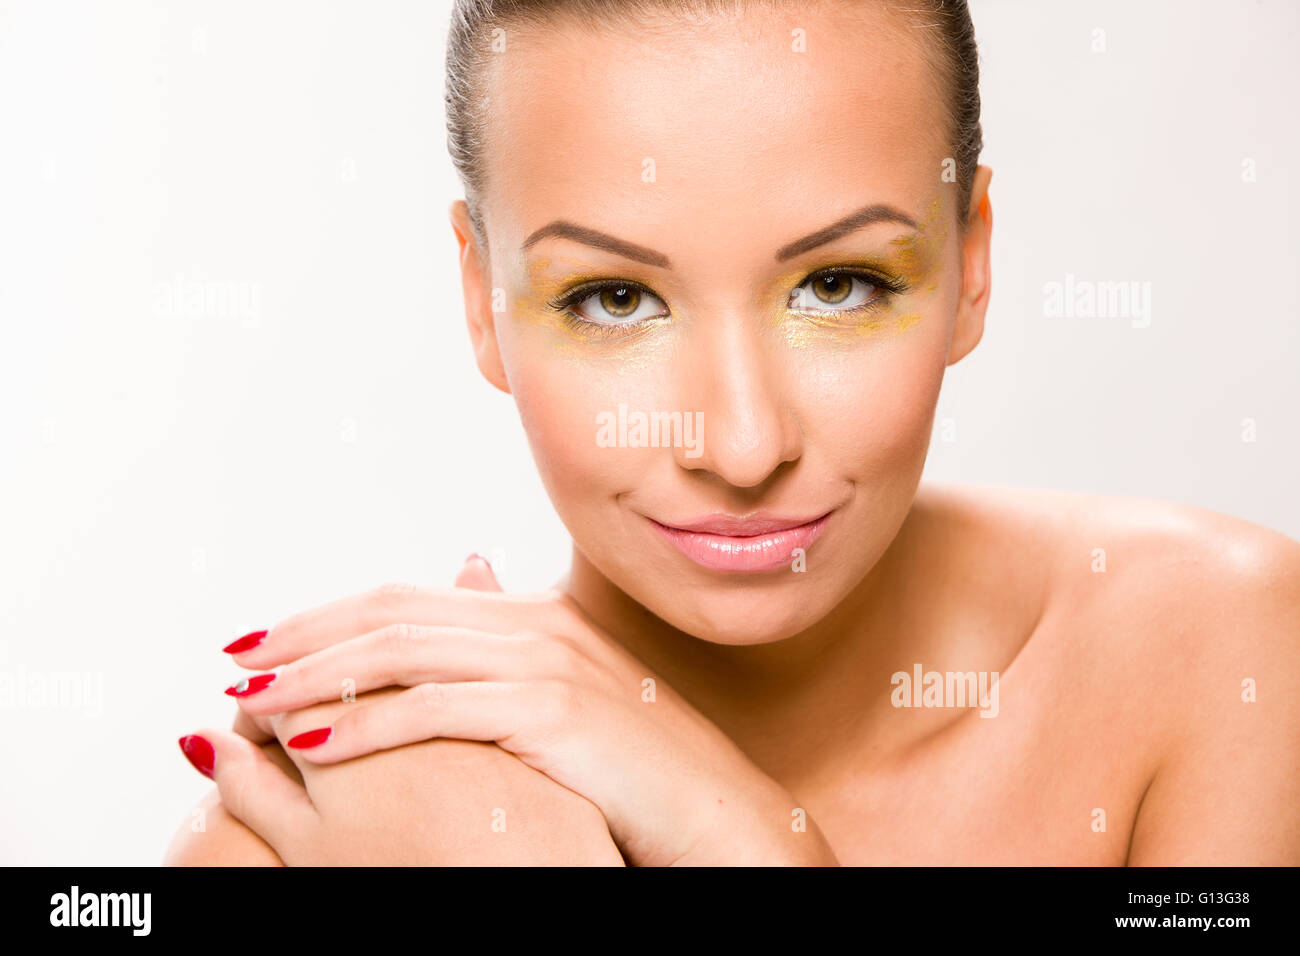 Brown sleek hair beautiful woman with hands close to face. Stock Photo